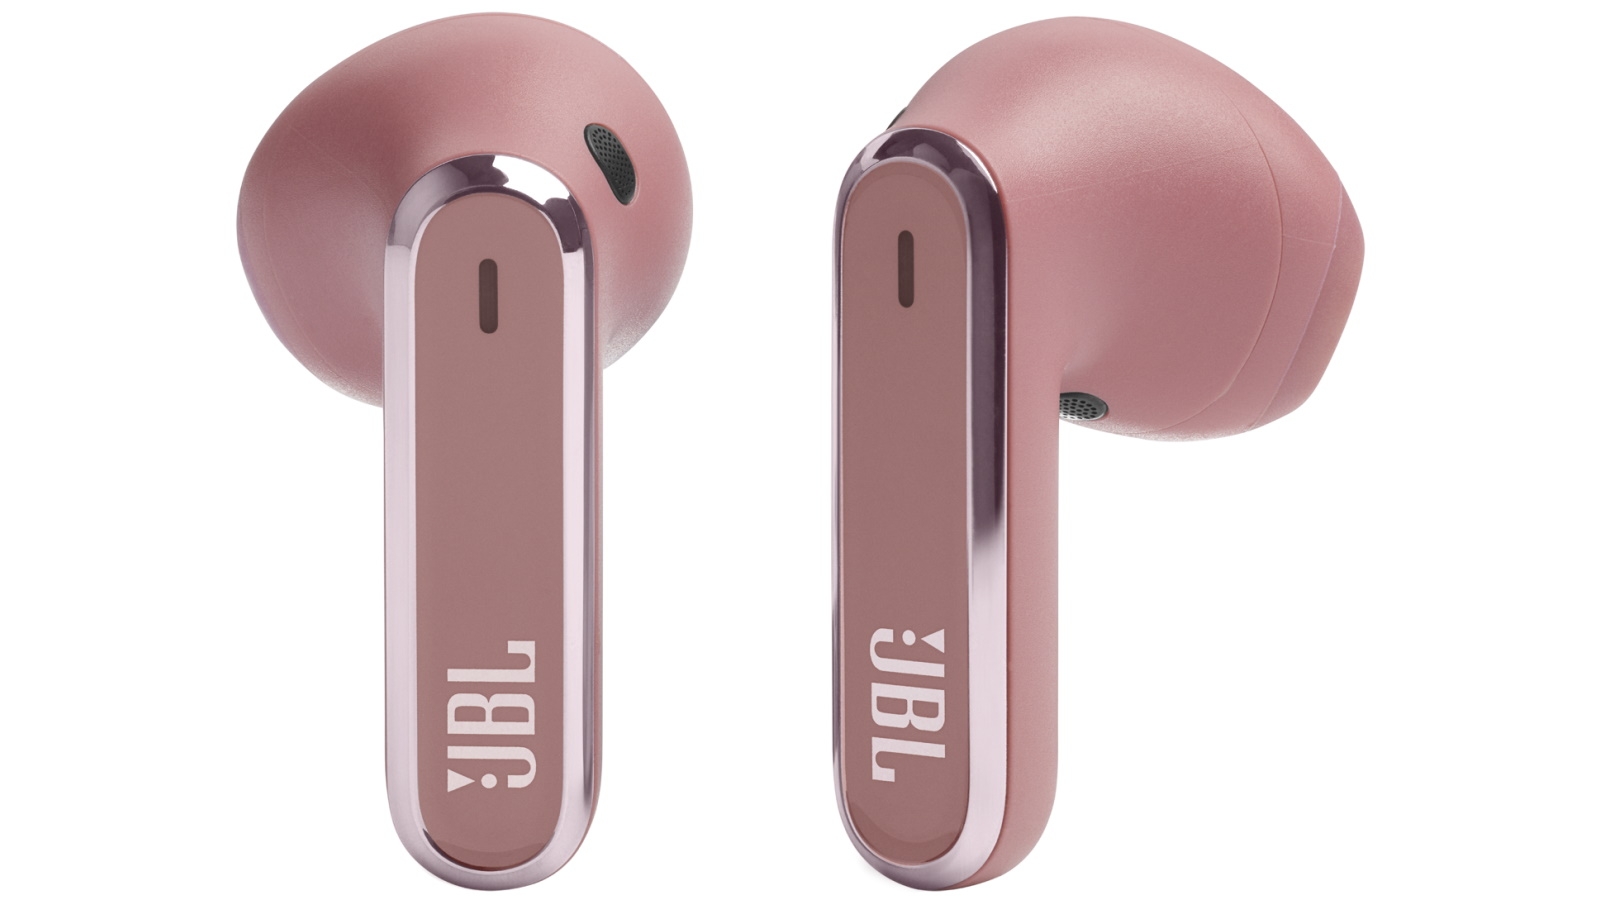 JBL Wave Flex TWS earbuds with Talk Thru feature & 32 hours battery life  launched in India - Gizmochina